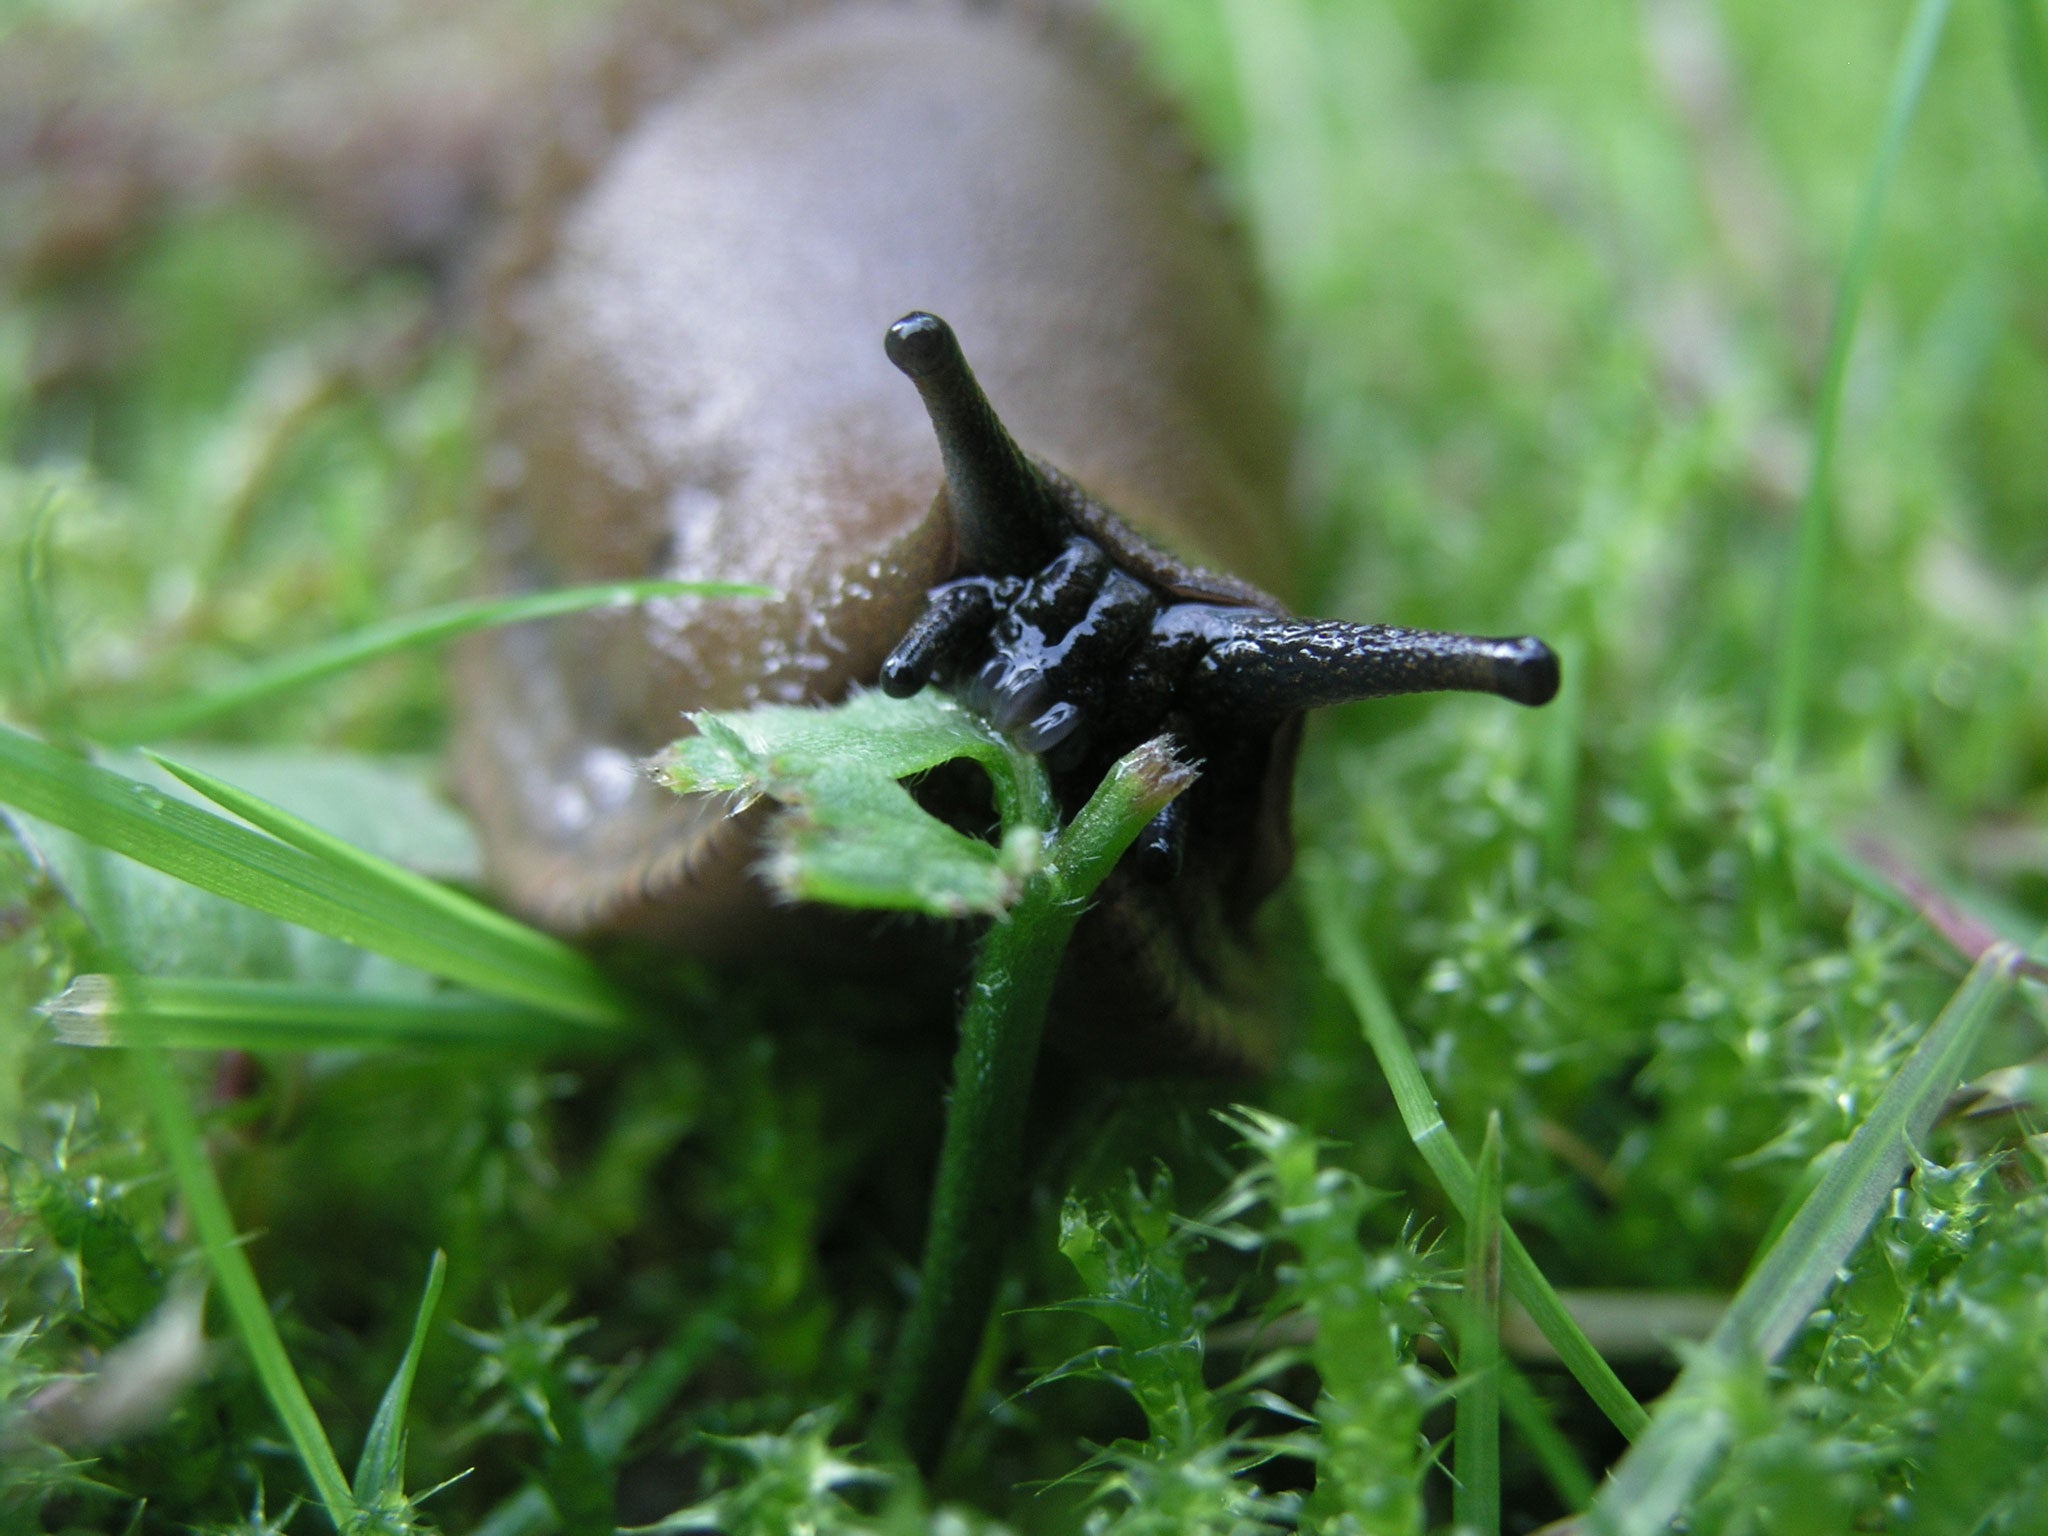 'This spring, the risk is high that we will face serious slug infestations'